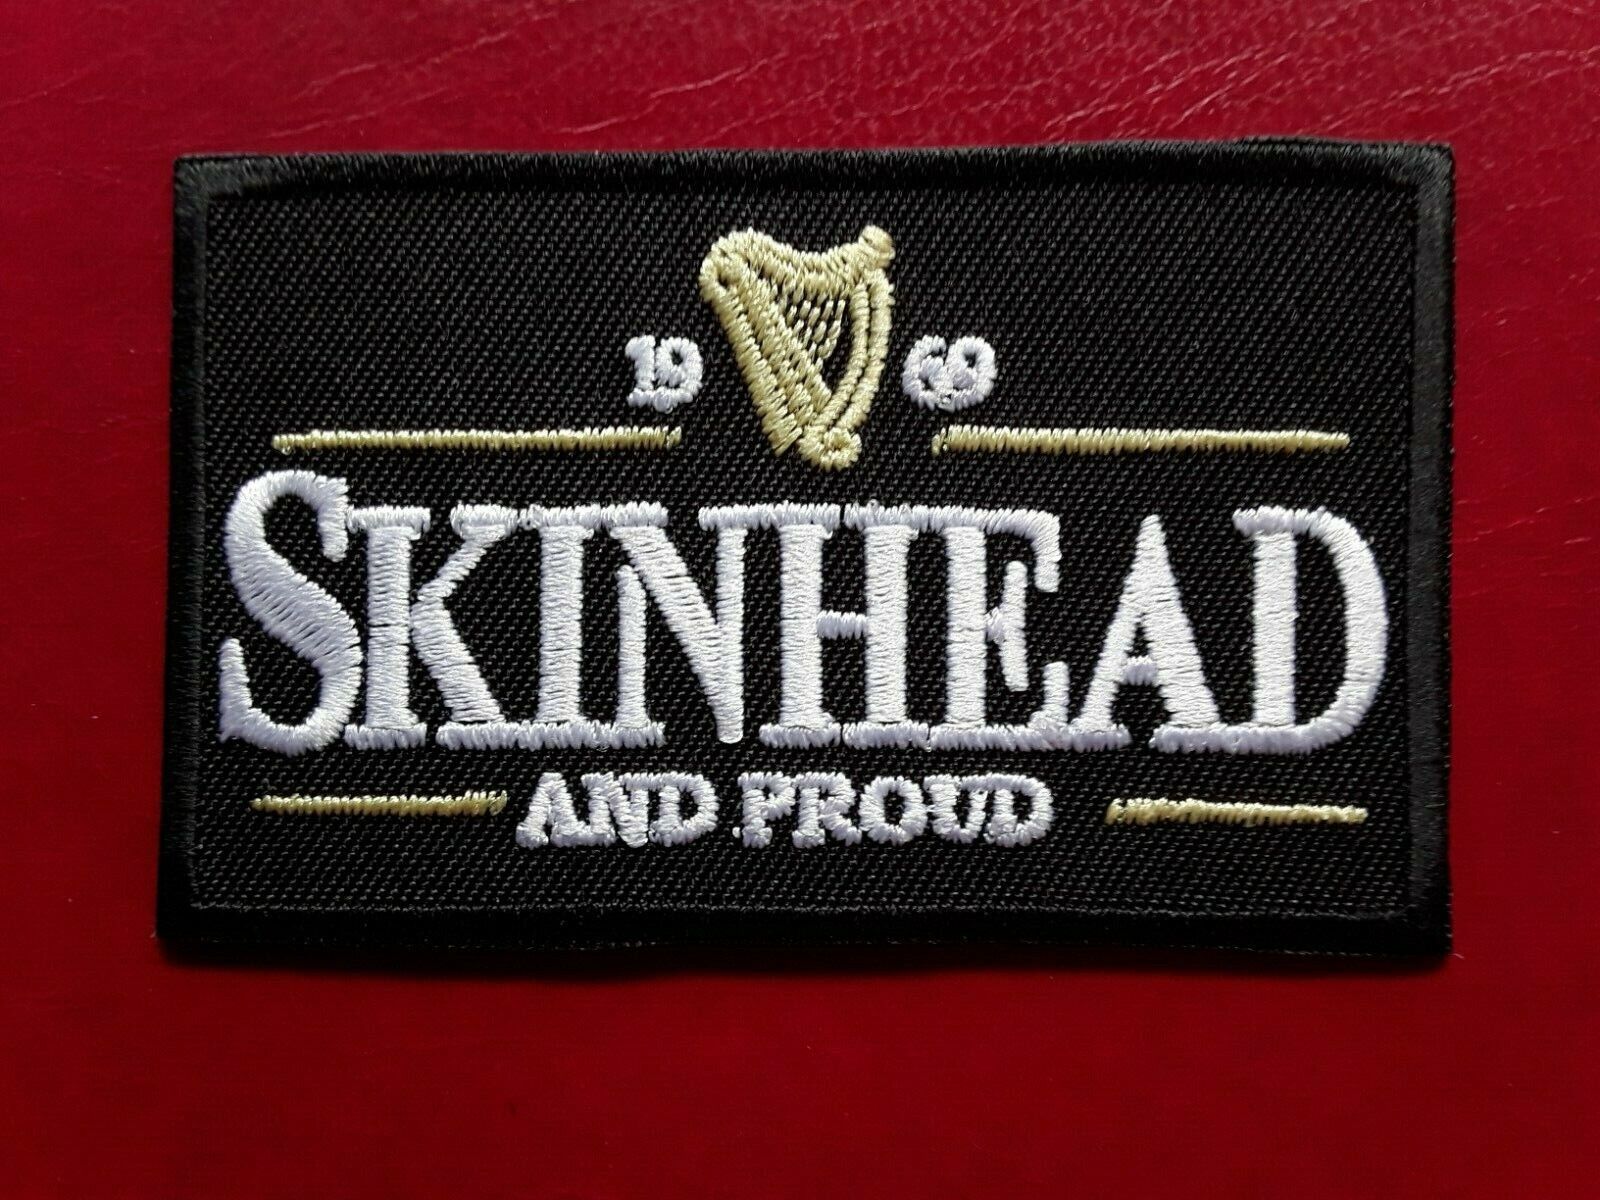 SKINHEAD AND PROUD REGGAE SKA 1969 TROJAN RECORDS EMBROIDERED PATCH UK SELLER